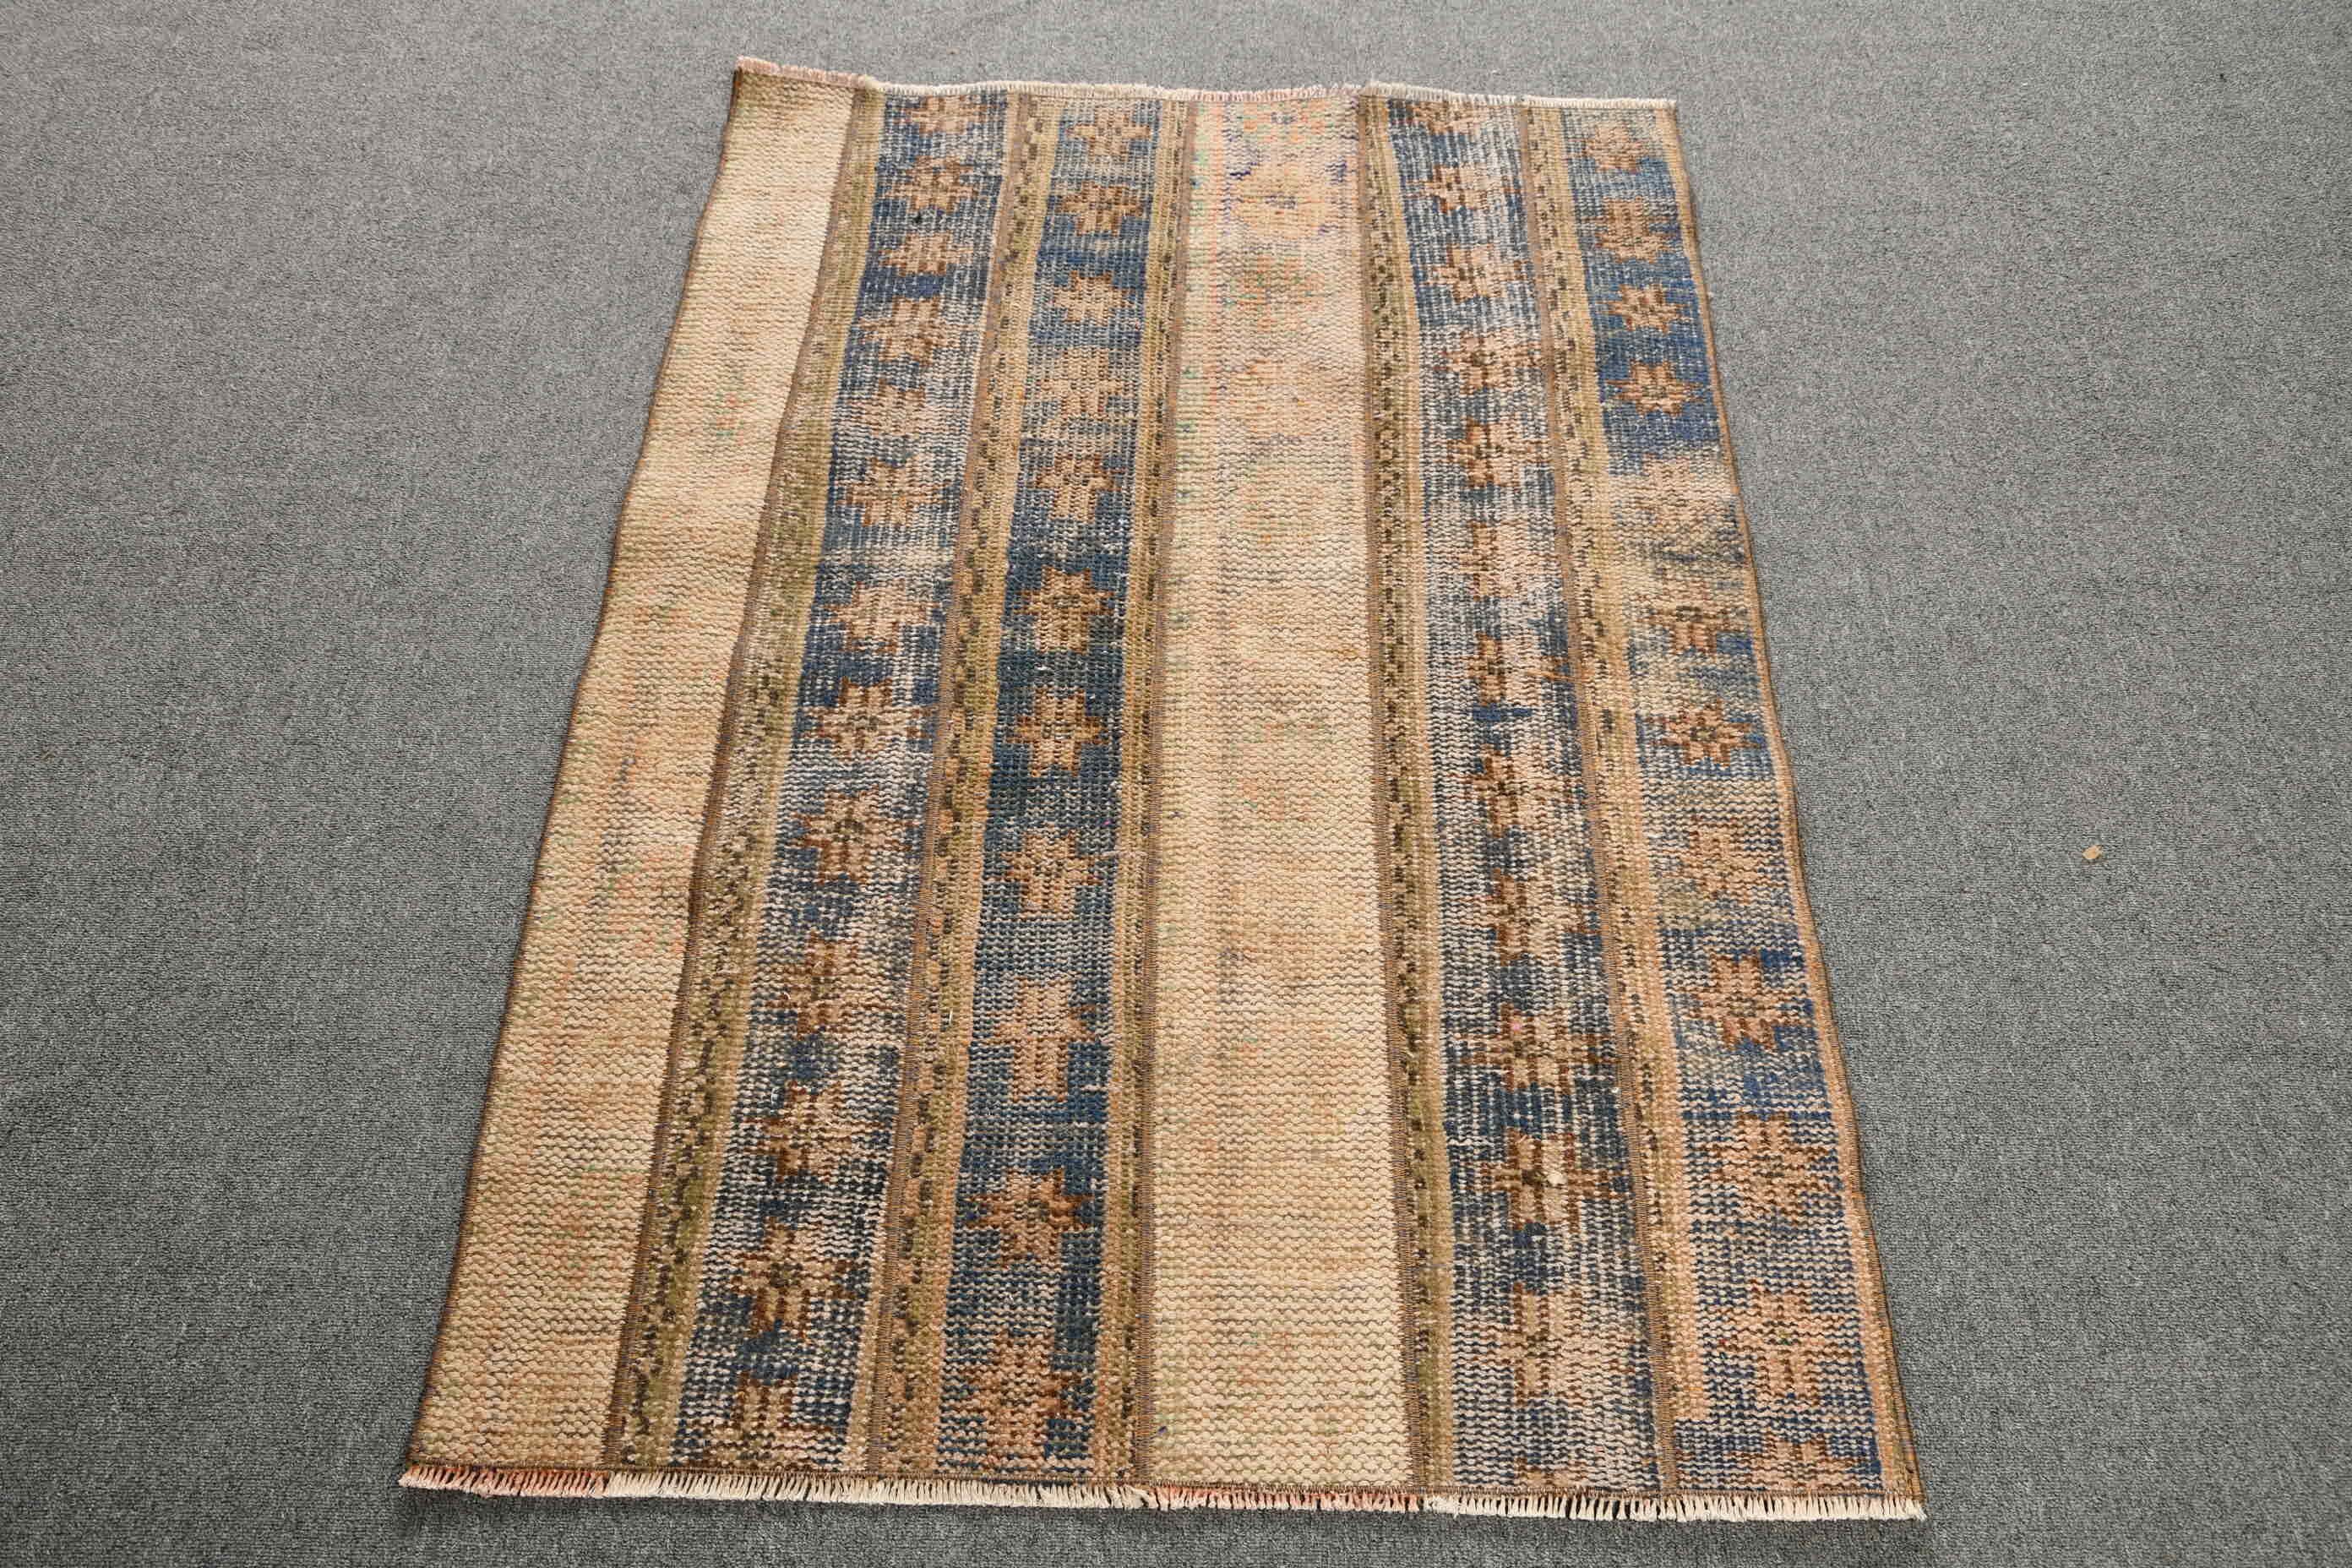 Turkish Rug, Beige Home Decor Rug, Vintage Rugs, Rugs for Entry, Floor Rugs, Home Decor Rug, Bedroom Rug, 3.4x4.7 ft Accent Rugs, Entry Rug